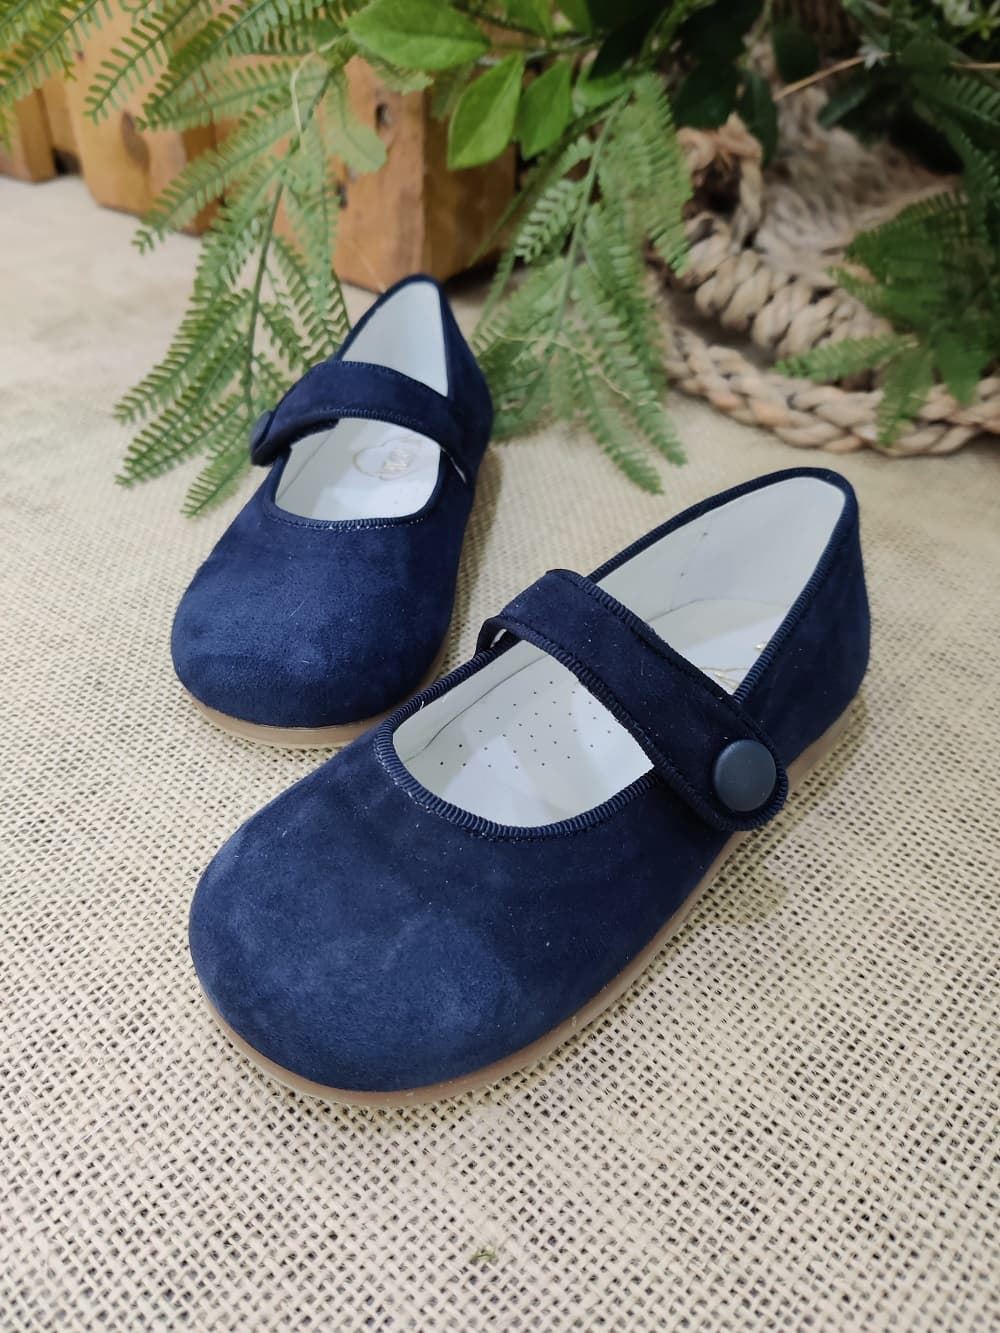 Pirufin Mary Janes for baby girls in Navy Blue suede - Image 5